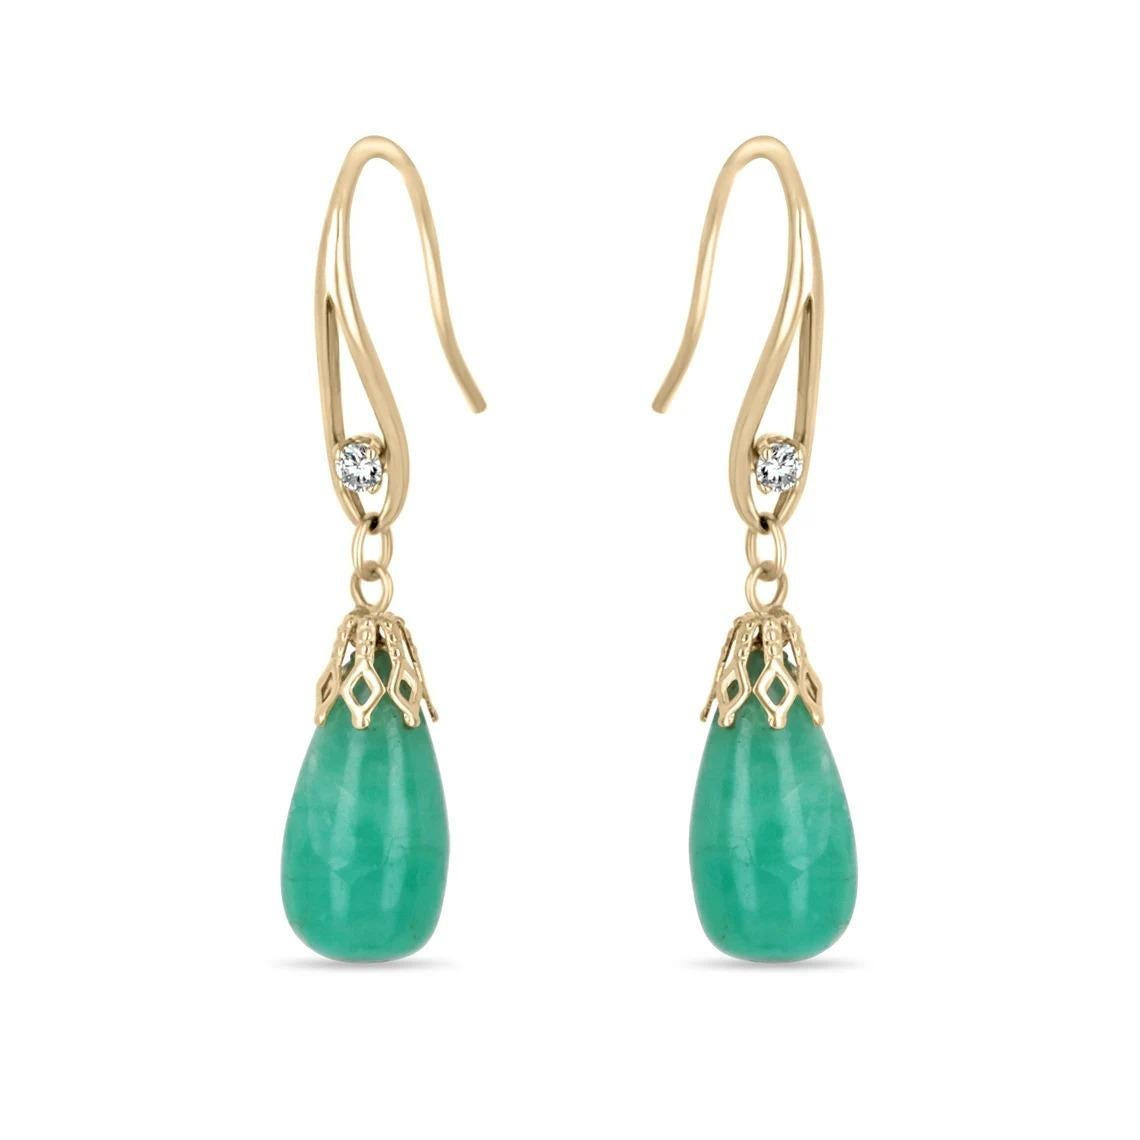 A pair of 14K Solid Gold, French Hook Earrings, features dangling briolette cabochon shaped Natural Colombian Emeralds. Stylish, easy to wear and they easily slide into place. The yellow gold hook is accented with a flawless diamond. Its style adds